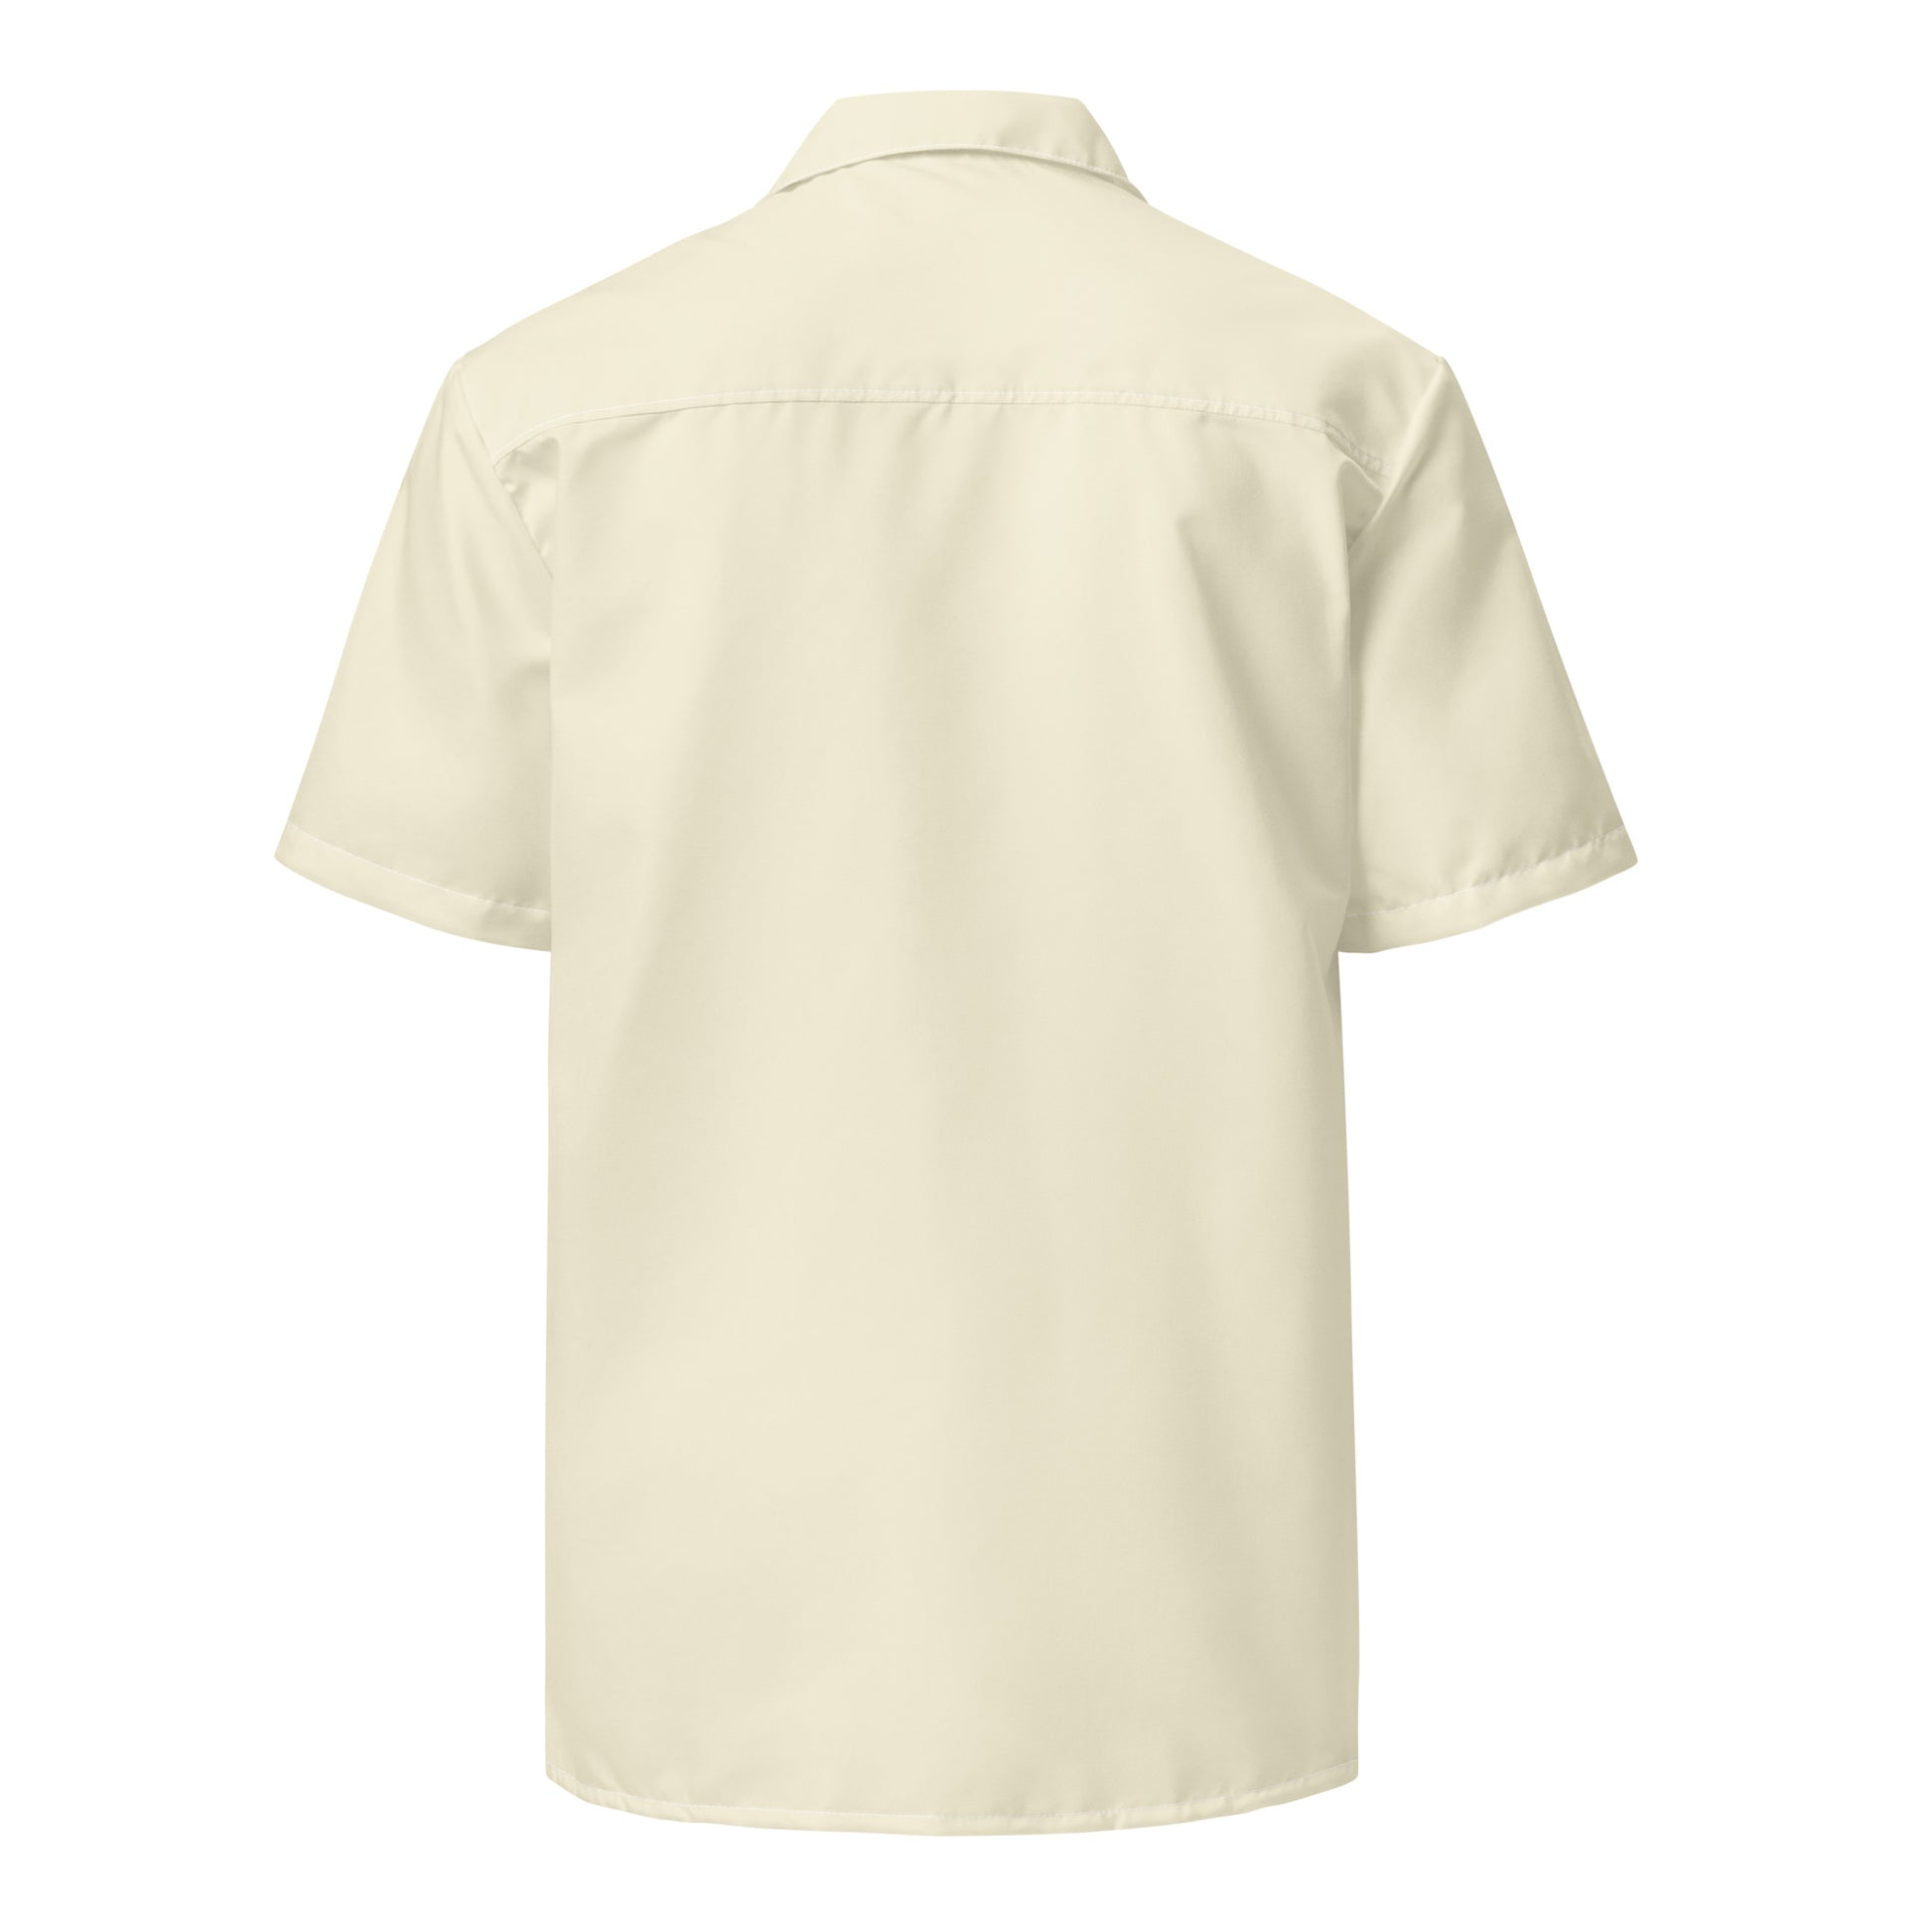 Humble Sportswear, men's lightweight, breathable, anti-sweat neutral Color Match button shirt 